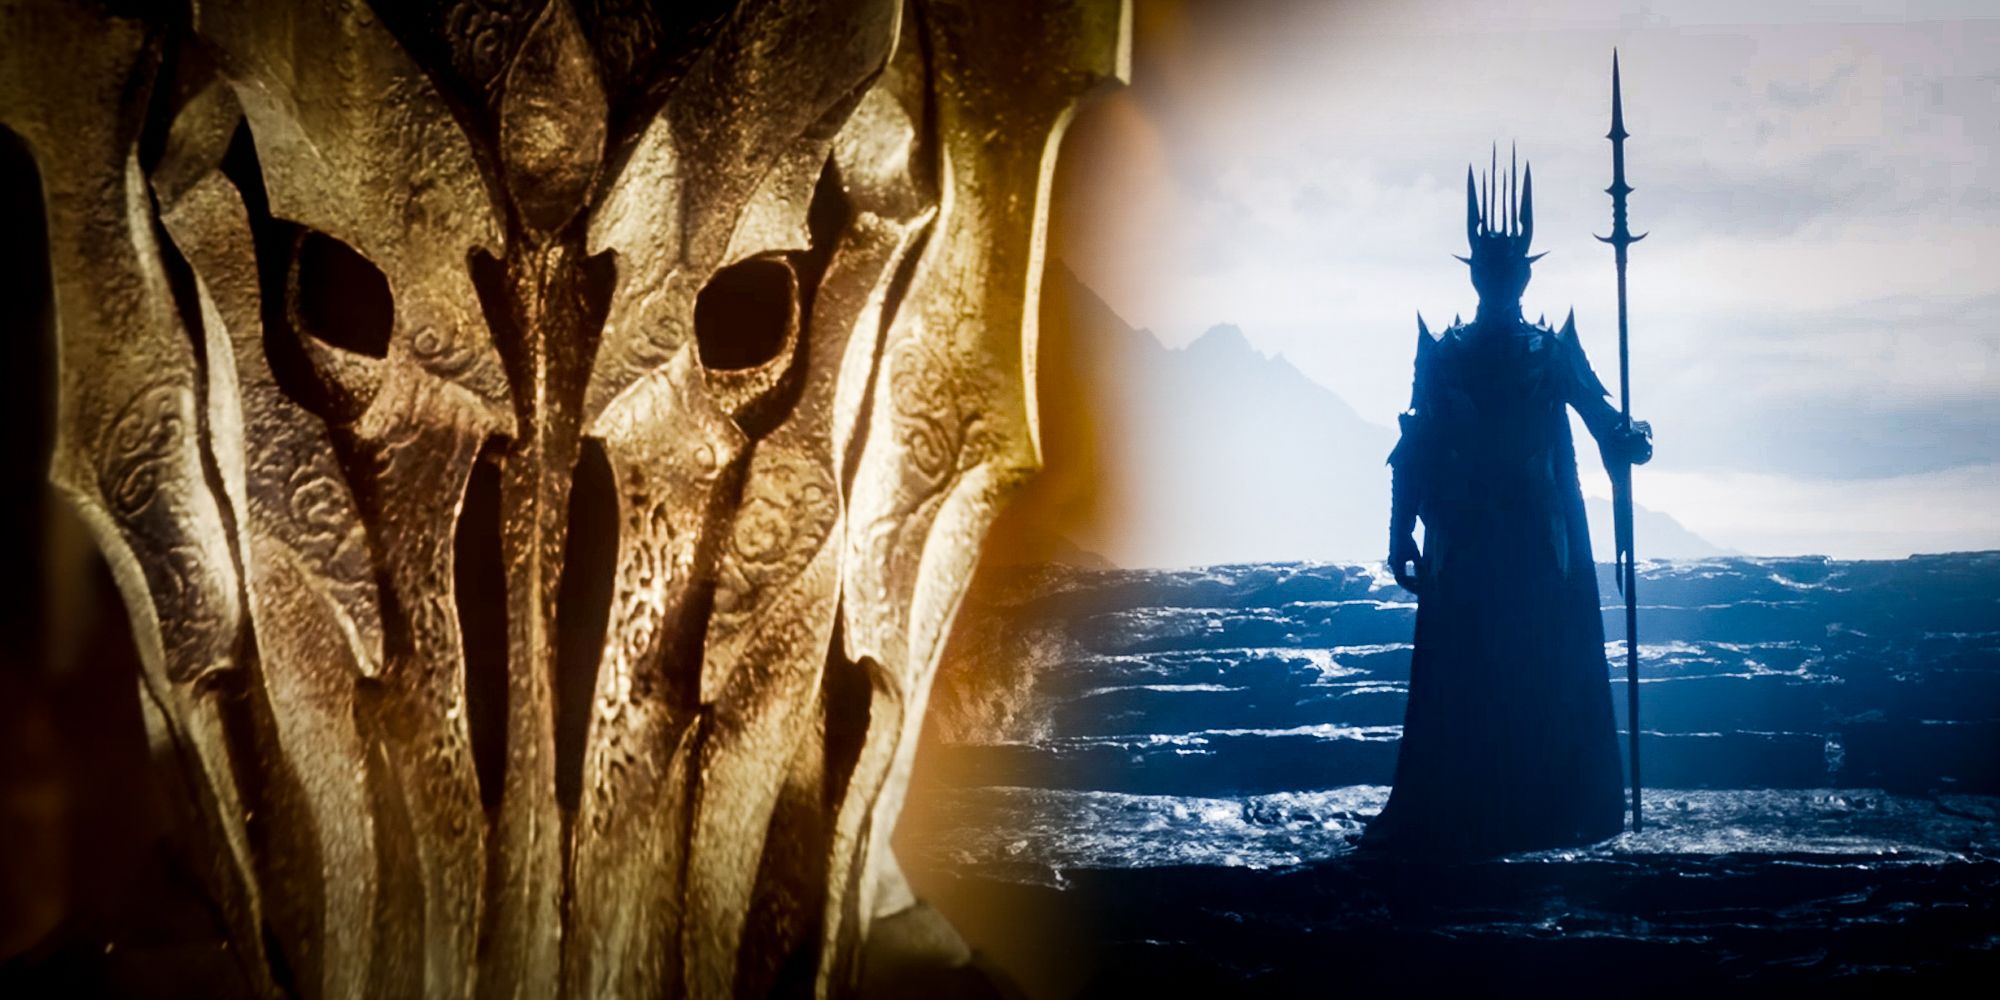 You Need to Check out this Life Size Sauron Bust!